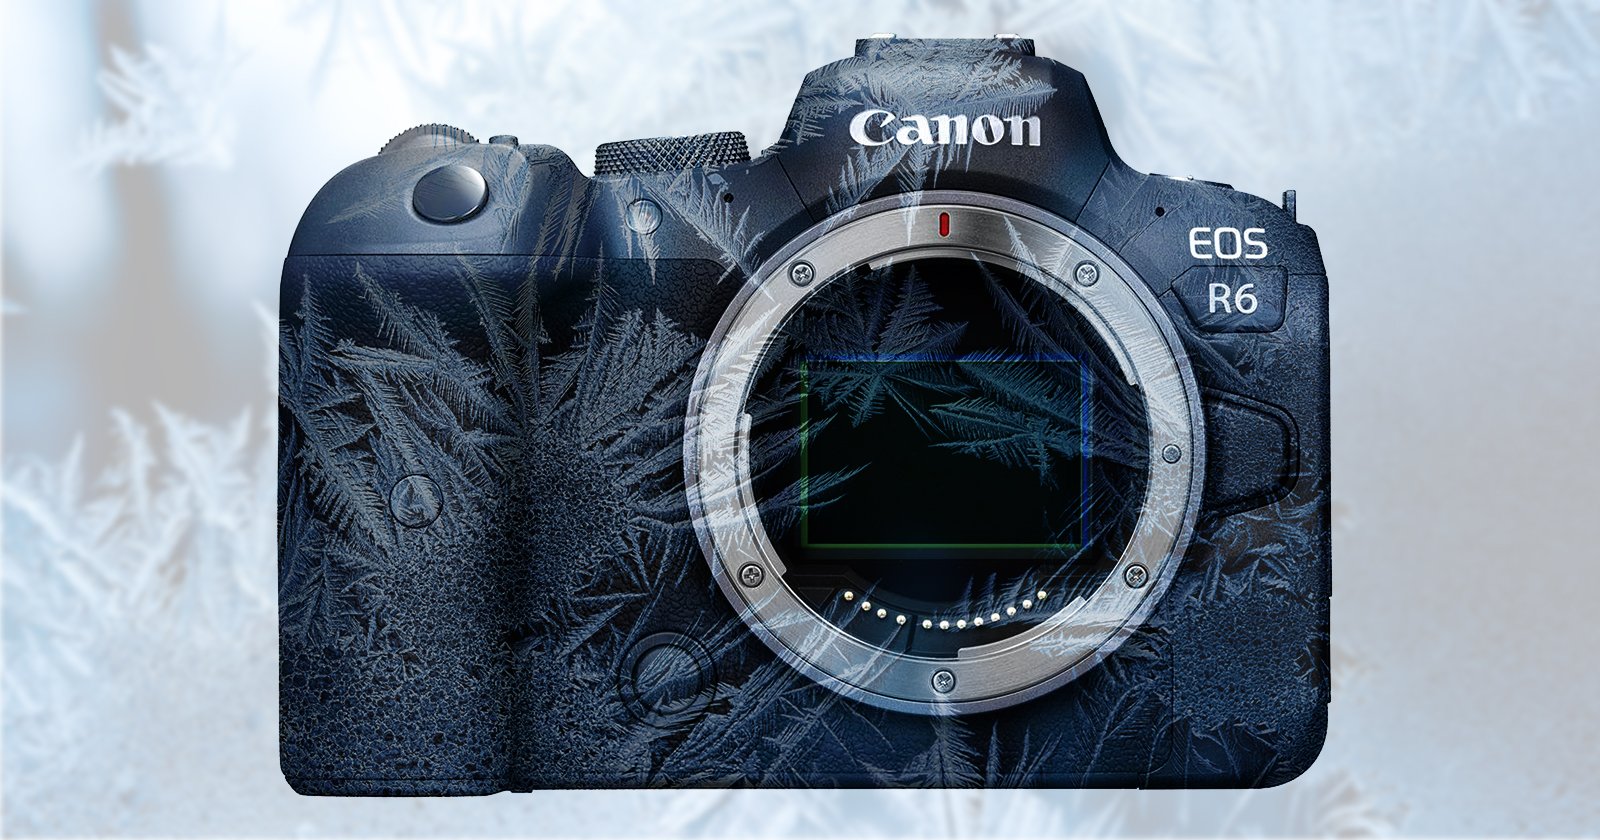 Canon Firmware 1.1.1 Makes a Huge Improvement to EOS R6 Overheating